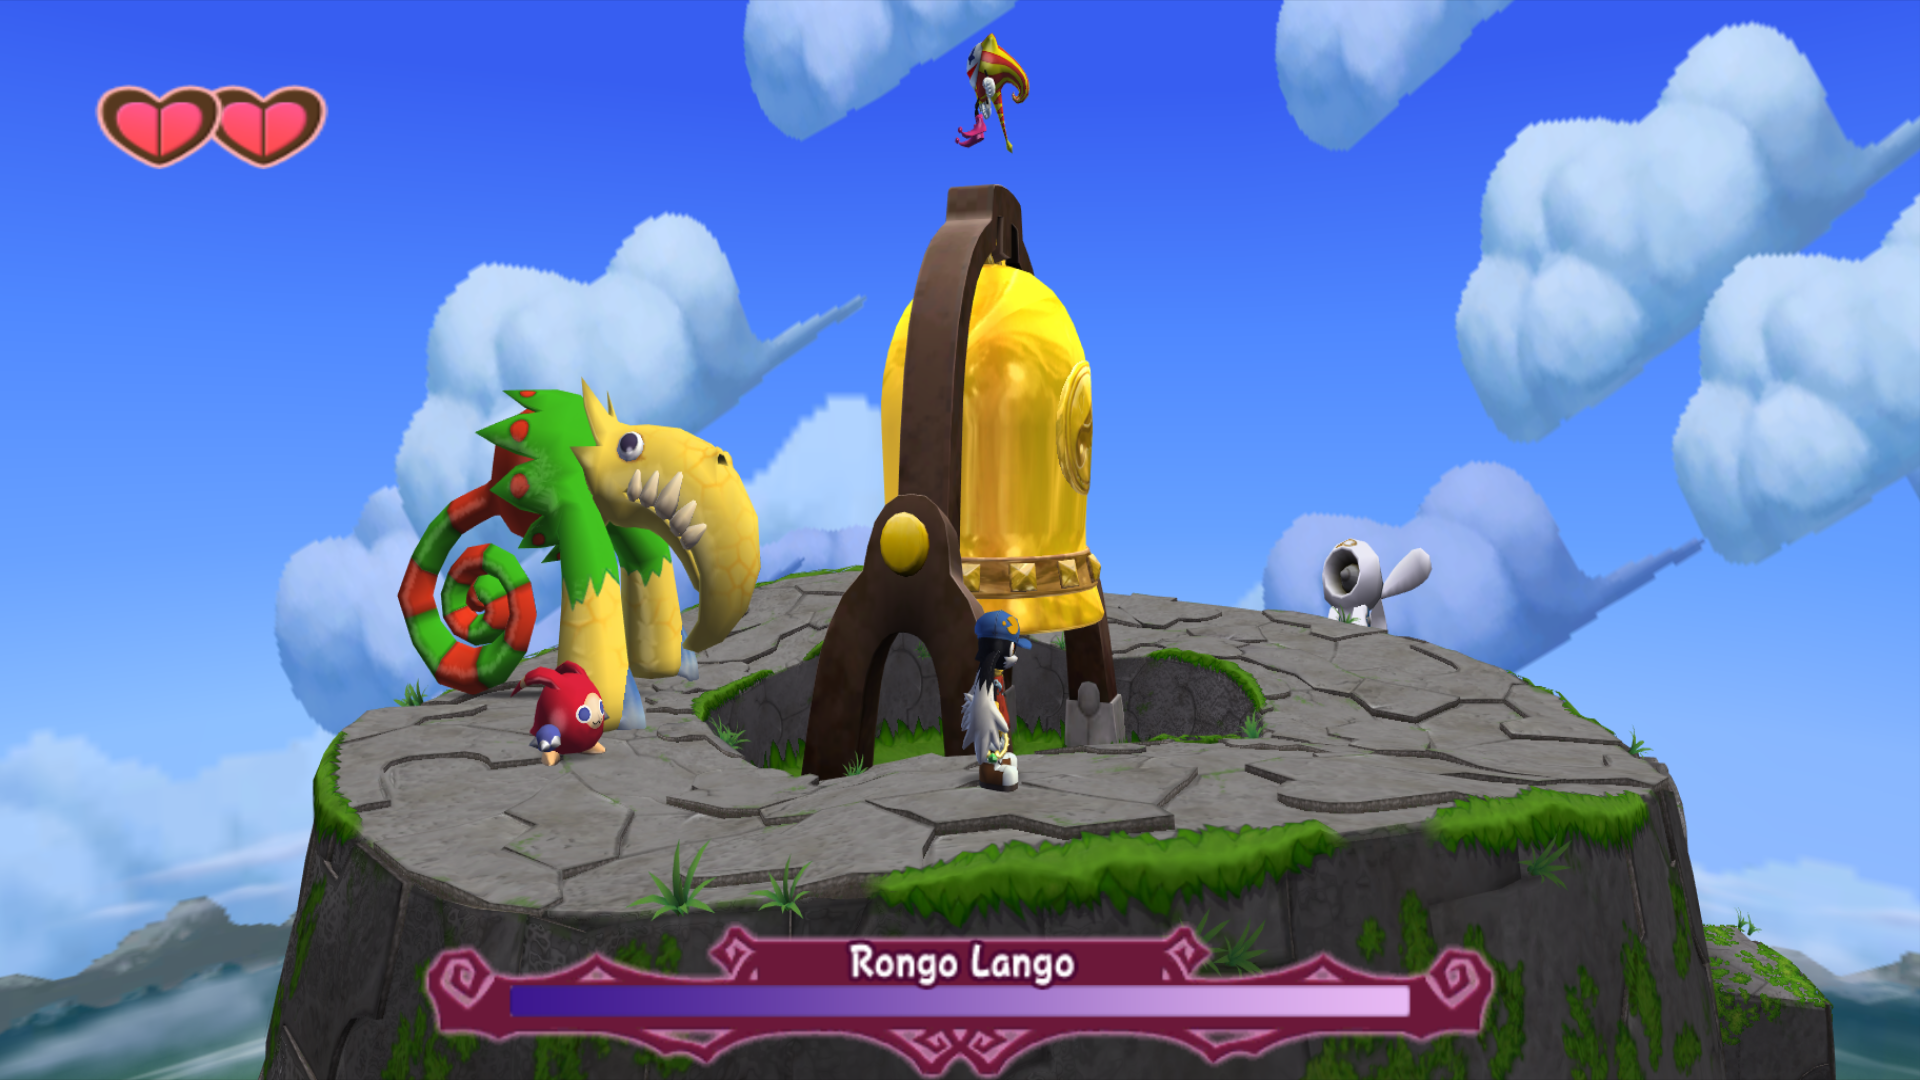 klonoa-firstbossfightrp2f1.png